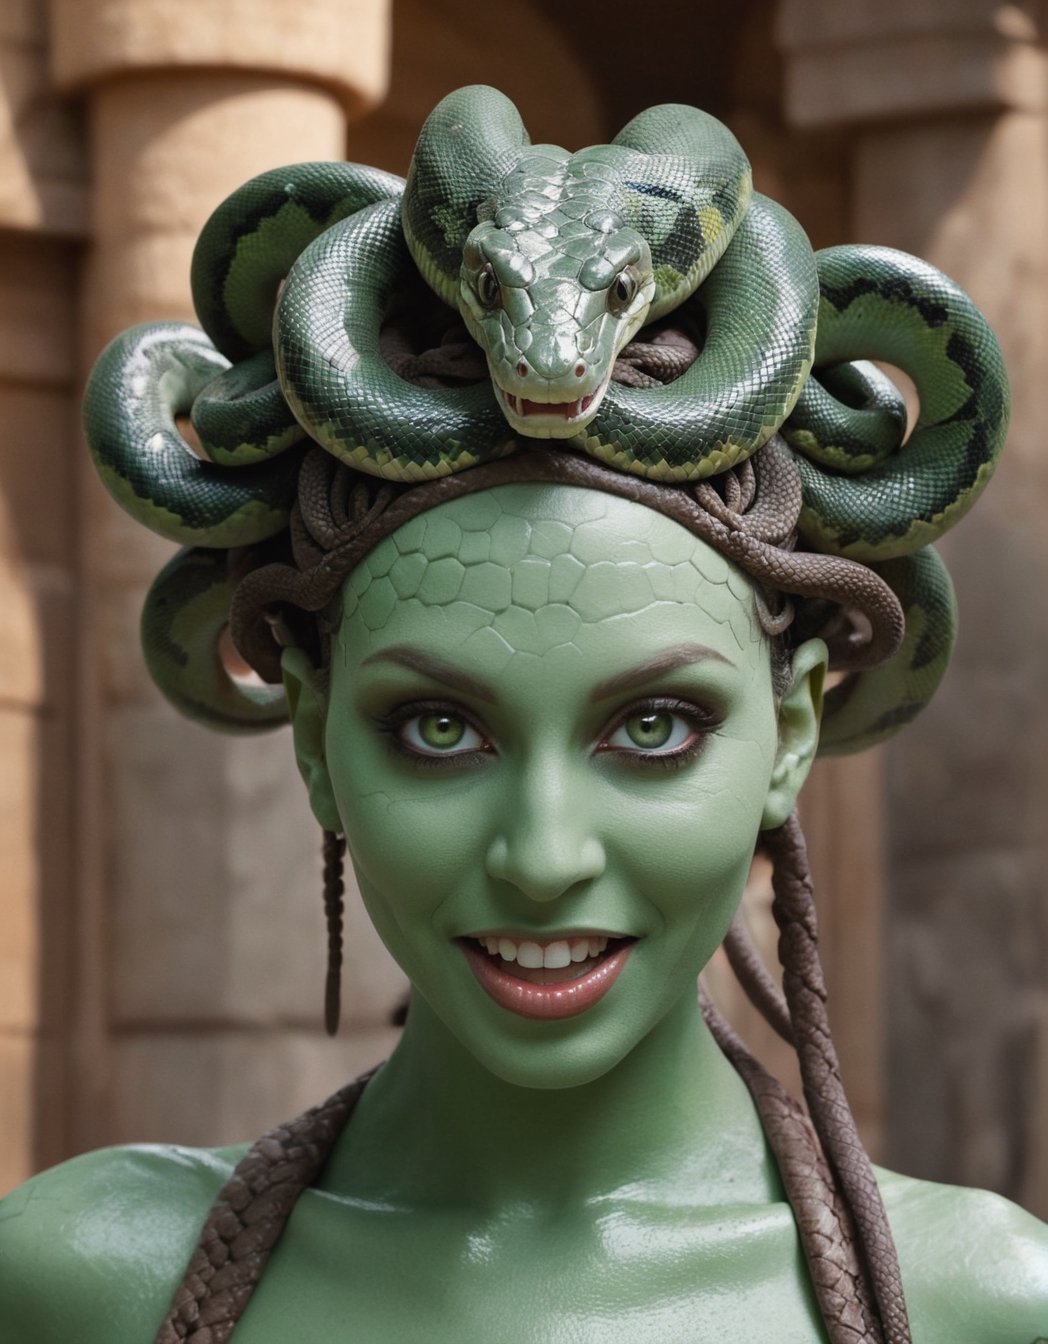 ((ultra realistic)), hyper details, best quality, beautifull exotic woman ((Medusa)), (hairless), ((many snakes come out of his scalp towards the camera)), mischievous smile, (big bright green eyes), rough and dry skin, snakes looking camera, Human skin with stone texture, (background of an ancient temple), masterpiece, cinematic moviemaker style